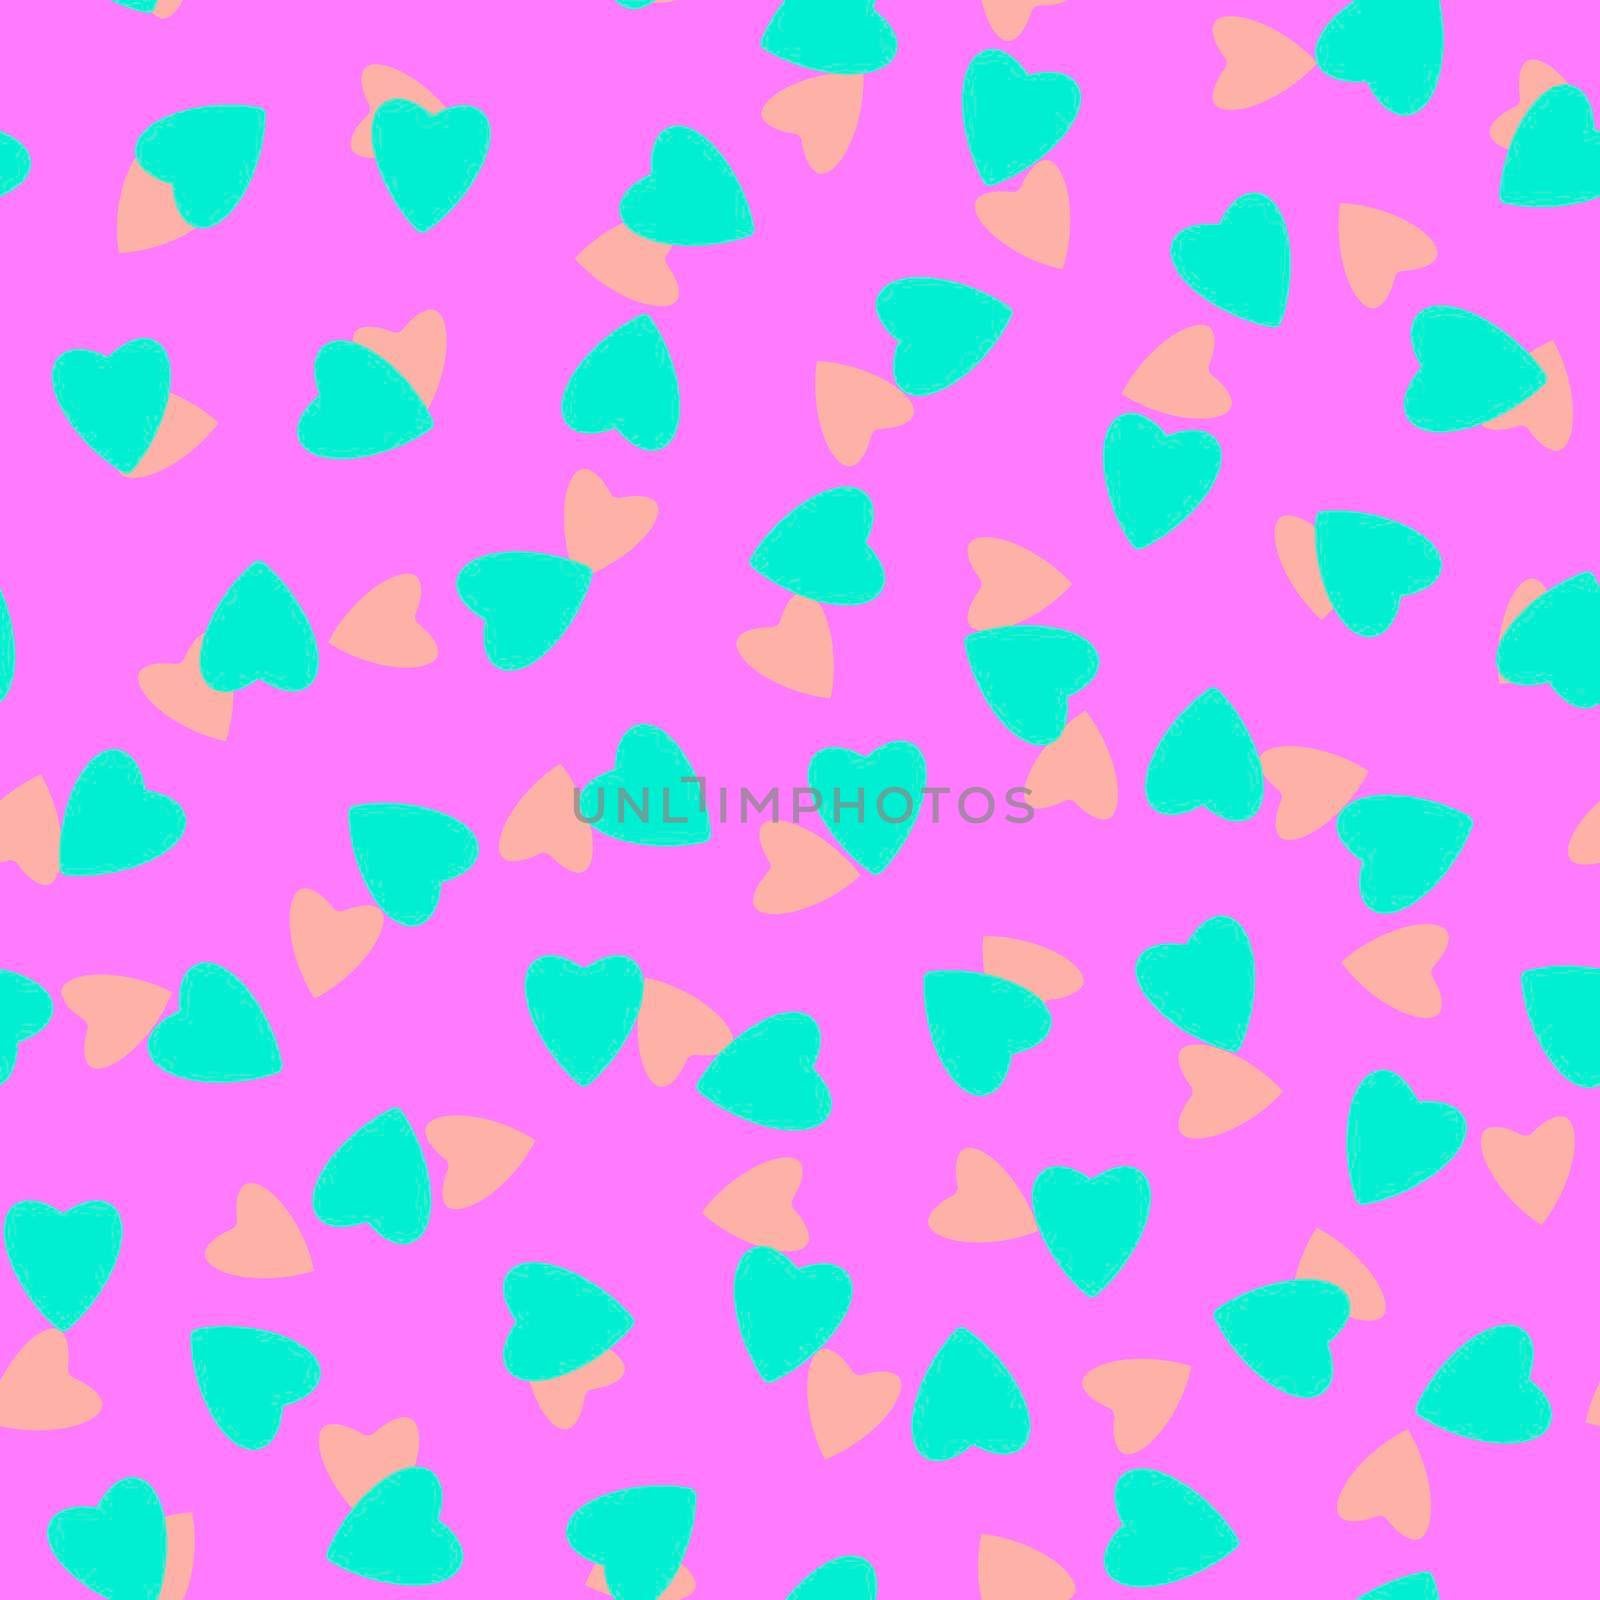 Simple hearts seamless pattern,endless chaotic texture made of tiny heart silhouettes.Valentines,mothers day background.Great for Easter,wedding,scrapbook,gift wrapping paper,textiles.Peach,azure,pink by Angelsmoon